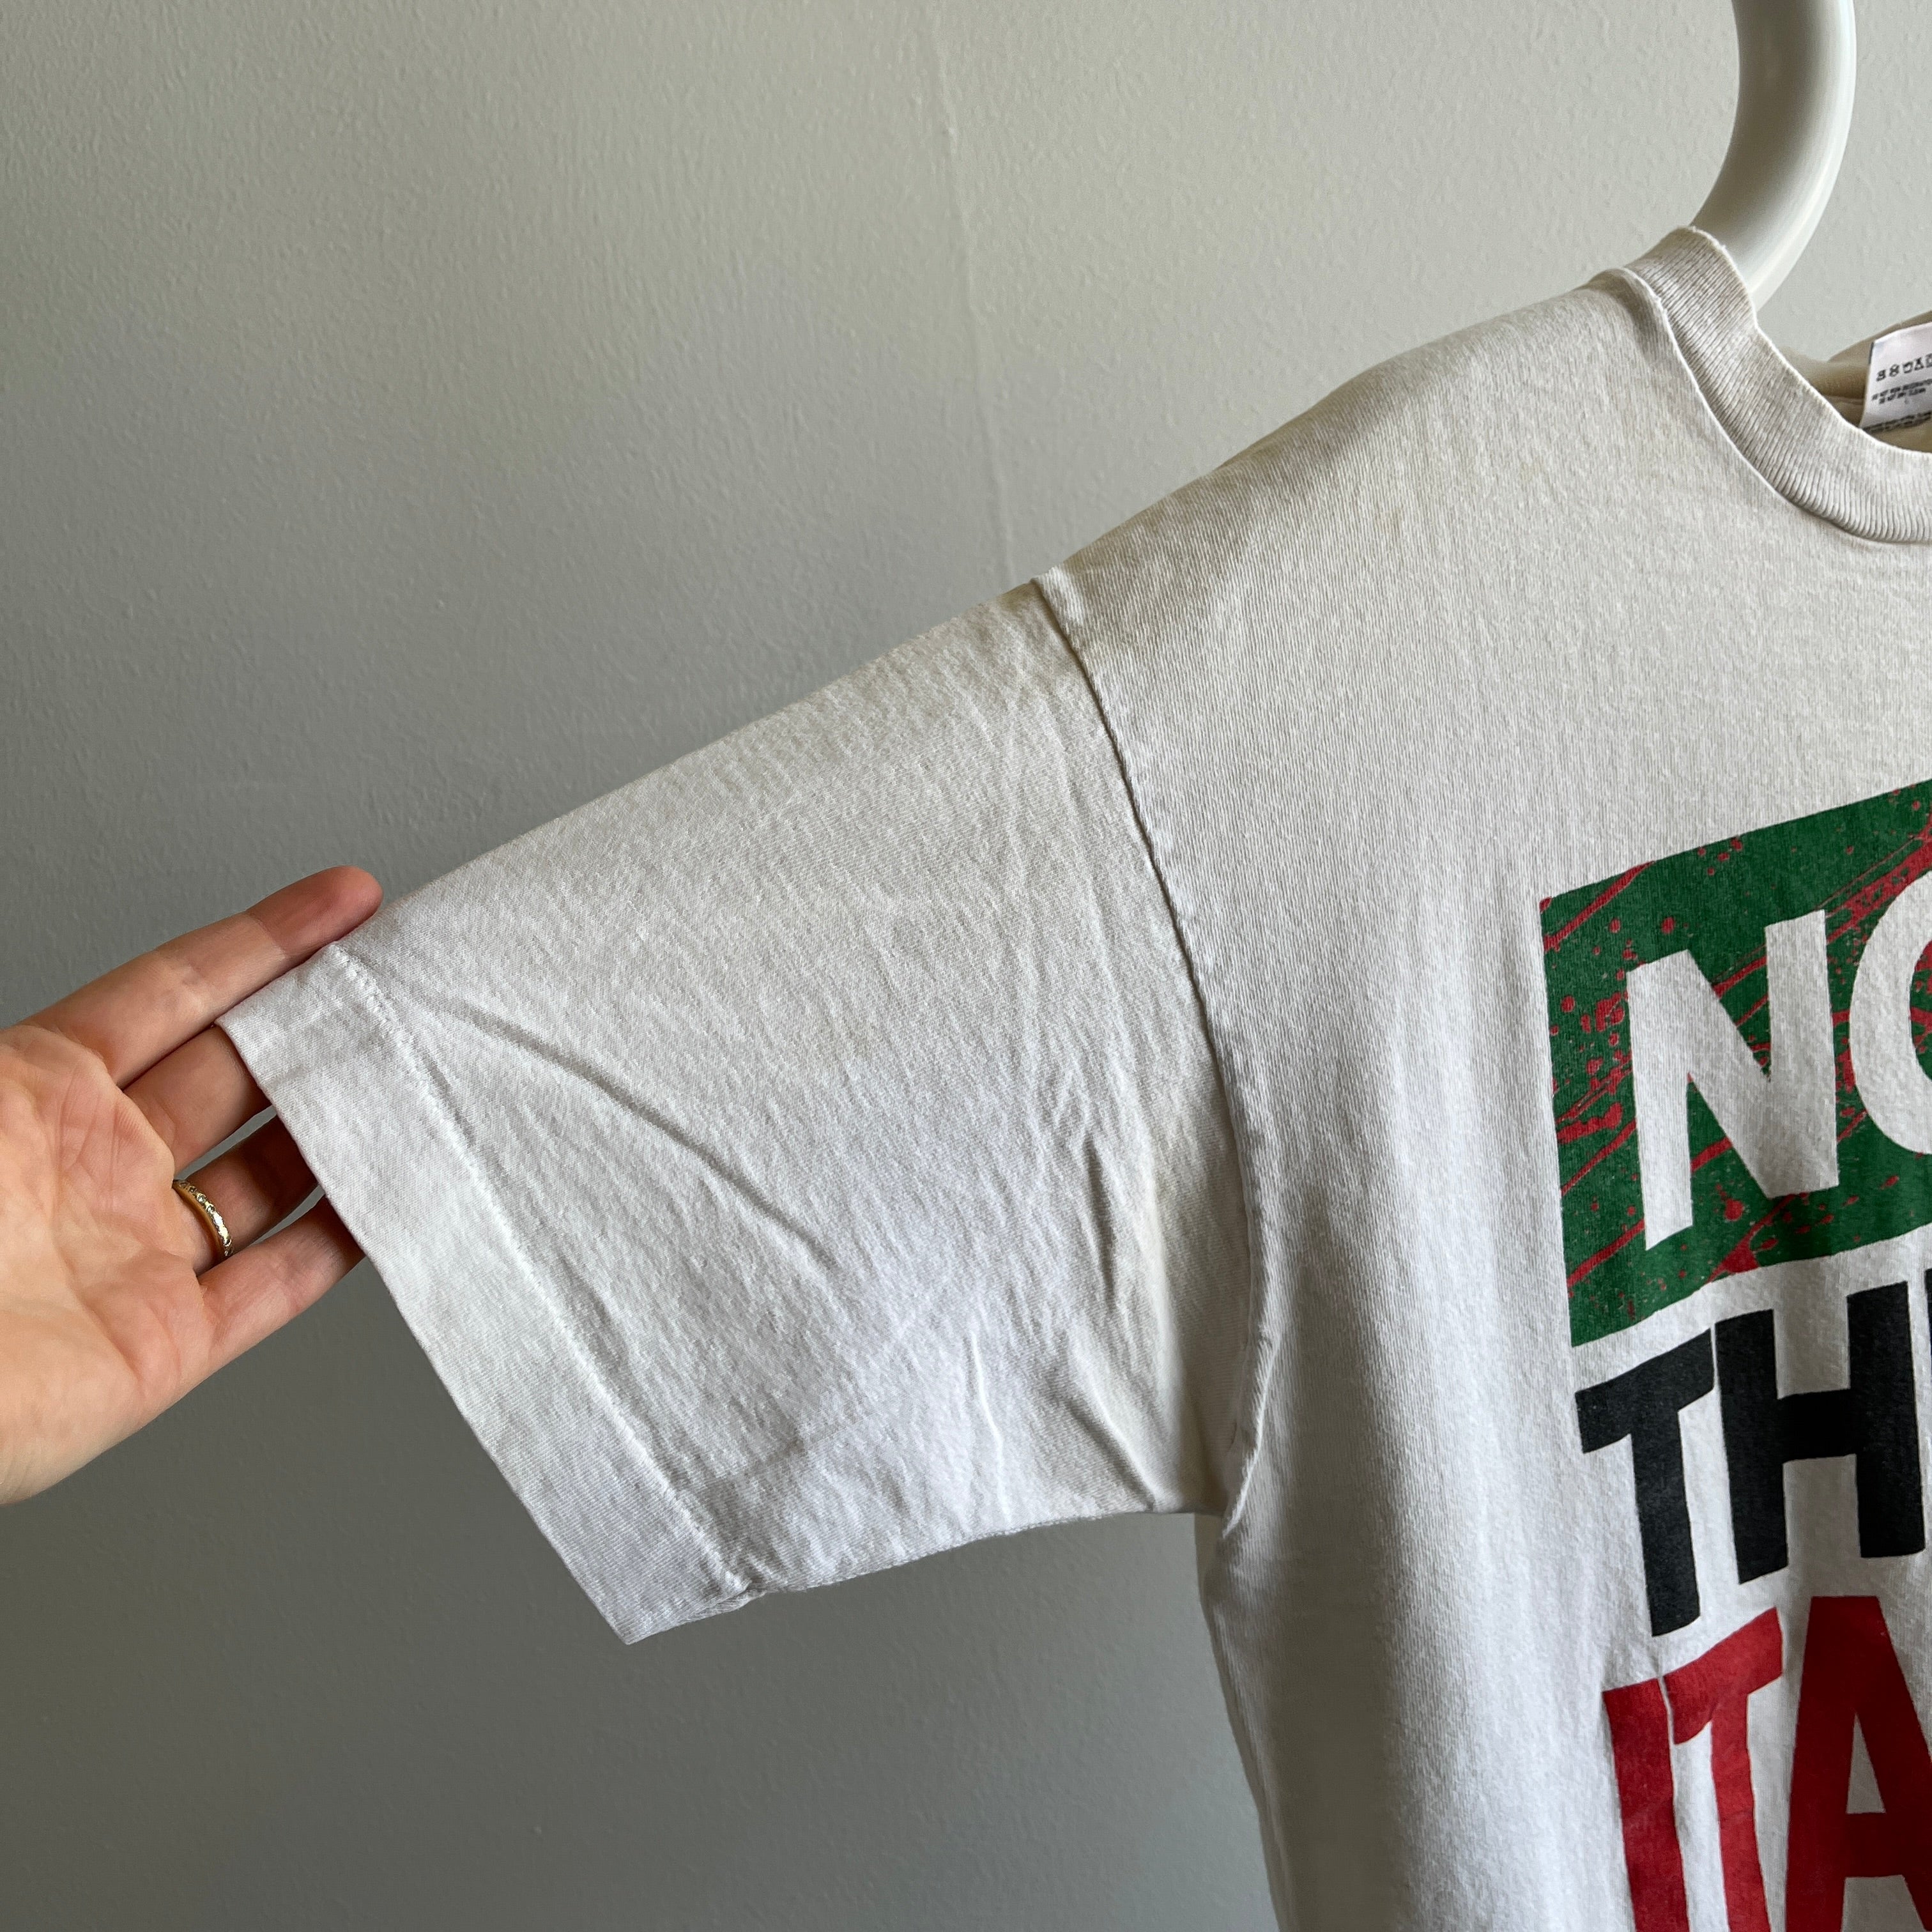 1980/90s Now This Is Italian T-Shirt